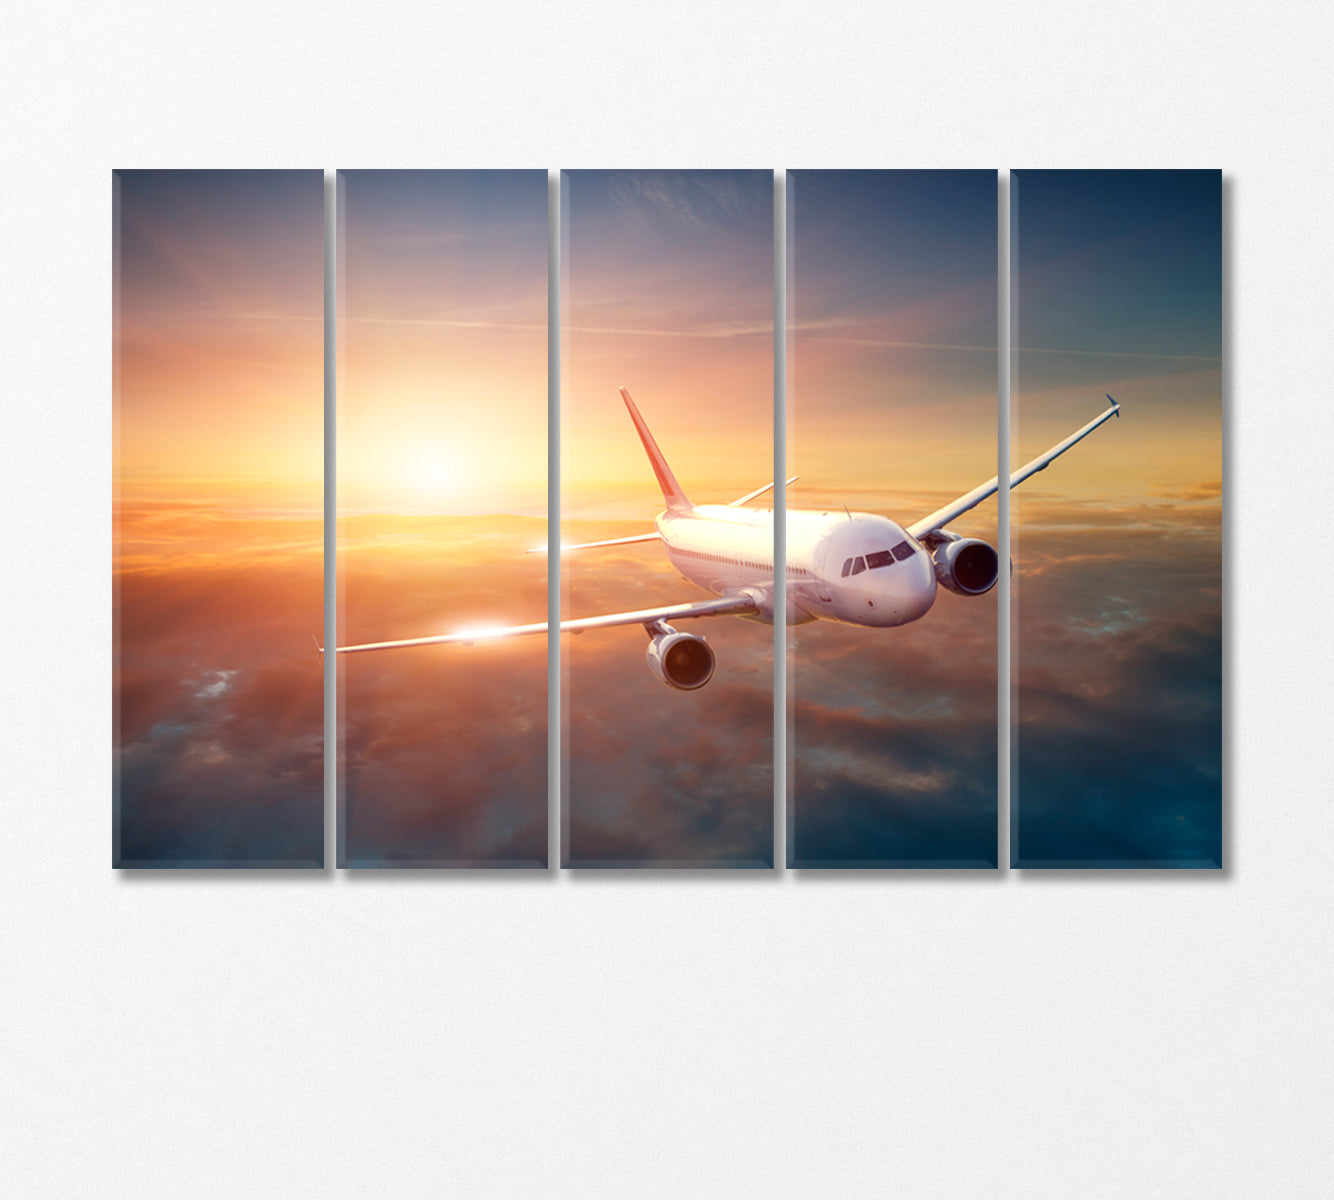 Airplane in Sky at Sunset Canvas Print-Canvas Print-CetArt-5 Panels-36x24 inches-CetArt